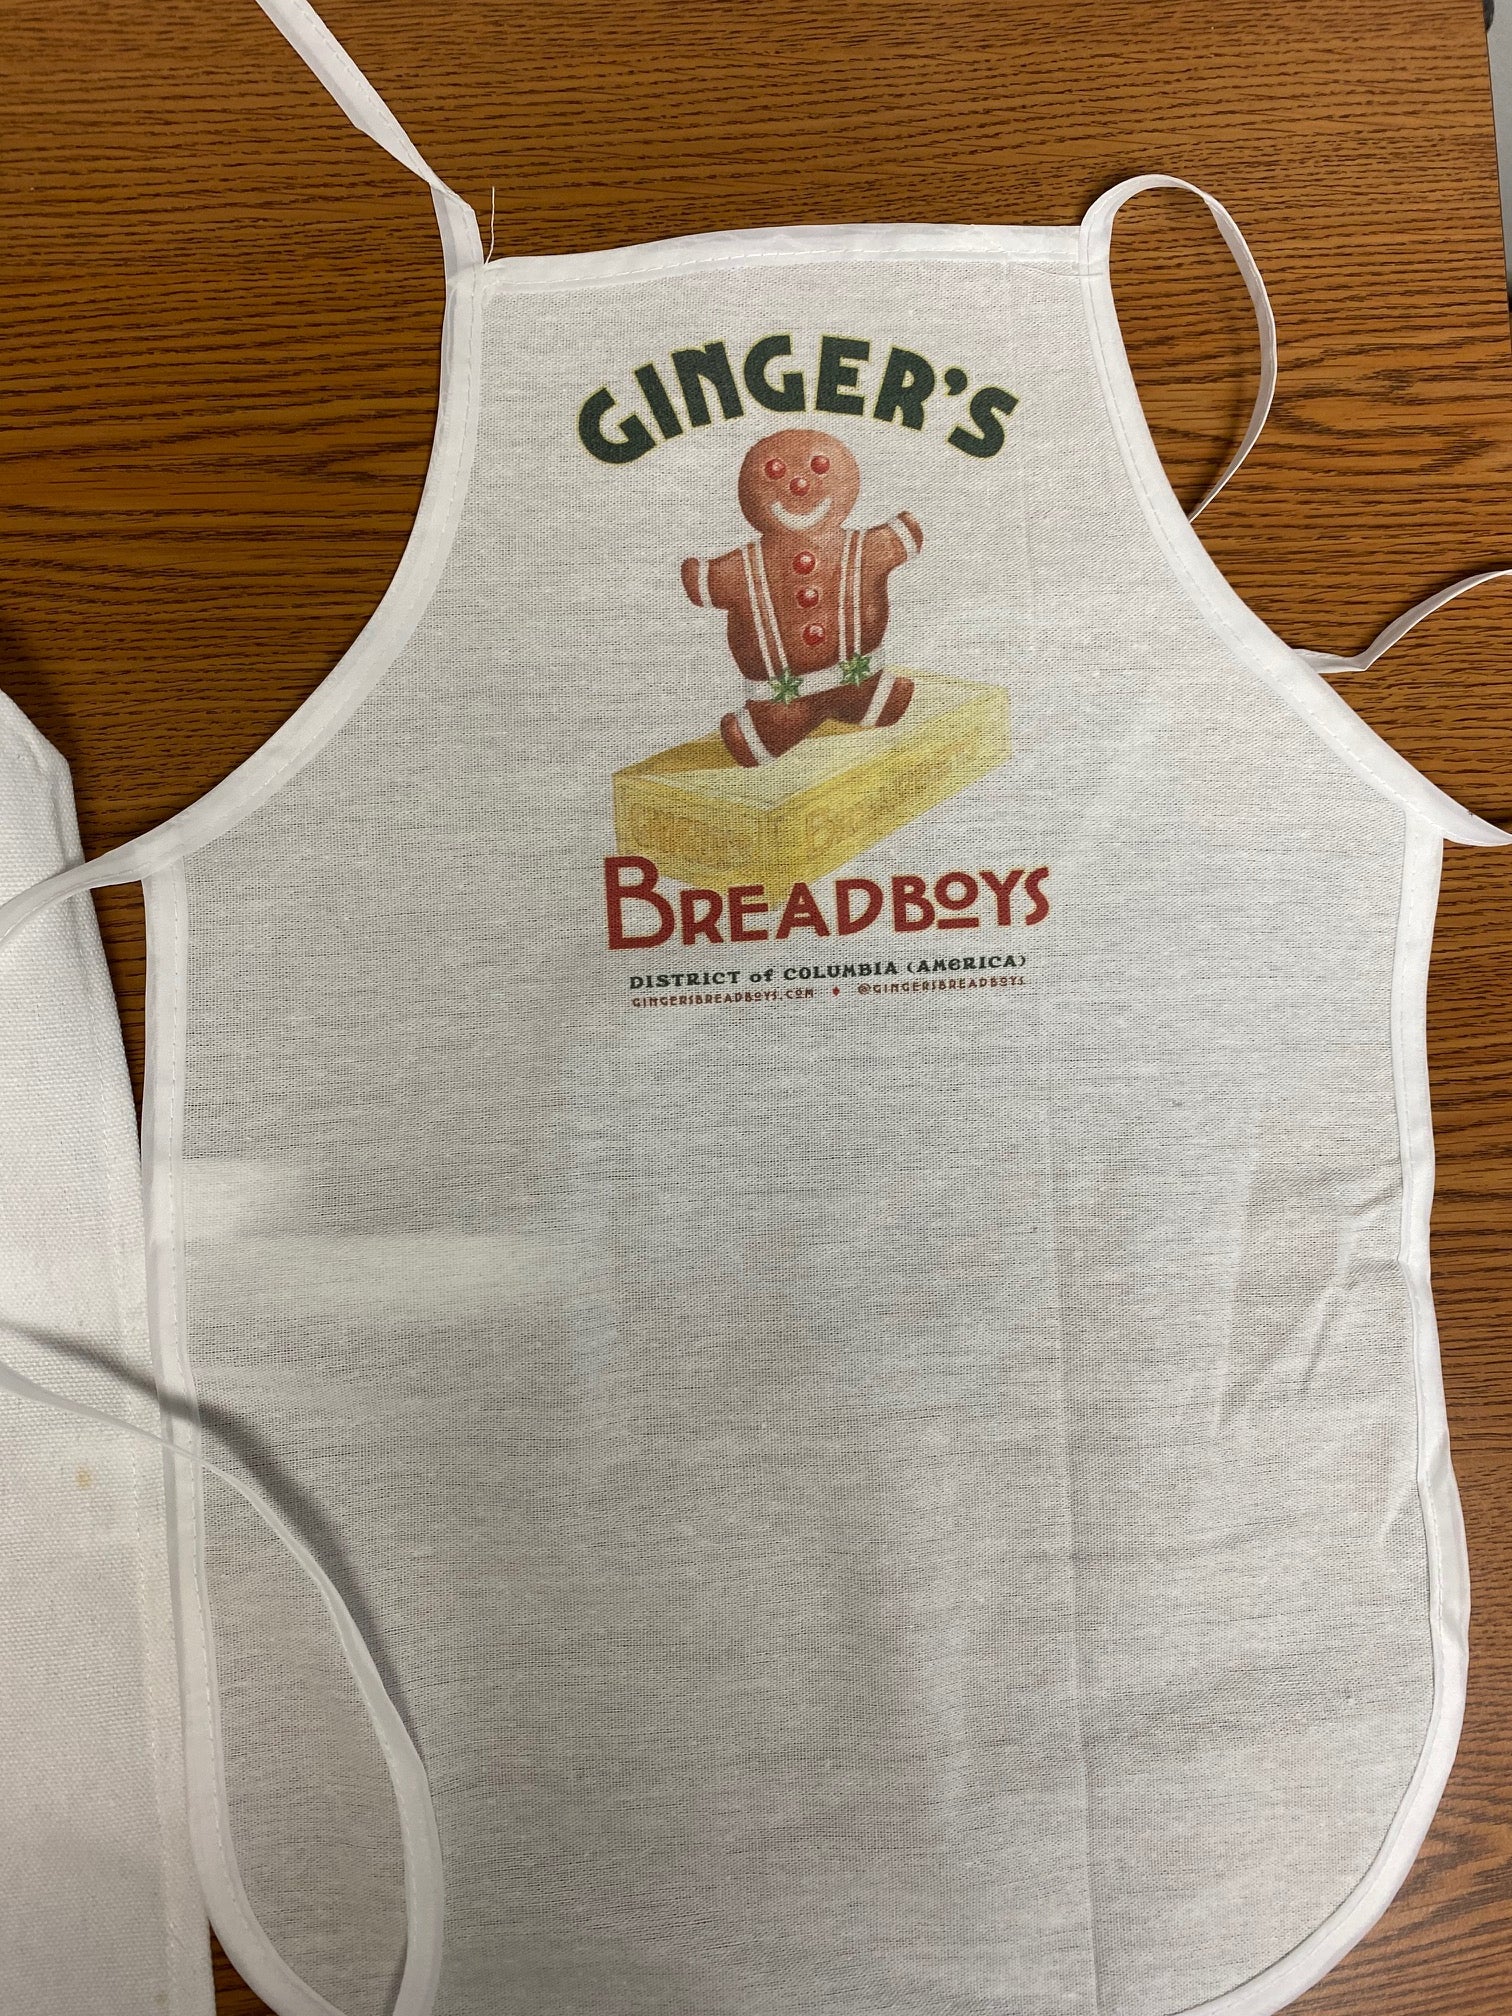 Gingerbread branded | Youth Sizes | Aprons for Baking | Ginger's Breadboys | Gingerbread Man Baking Kits